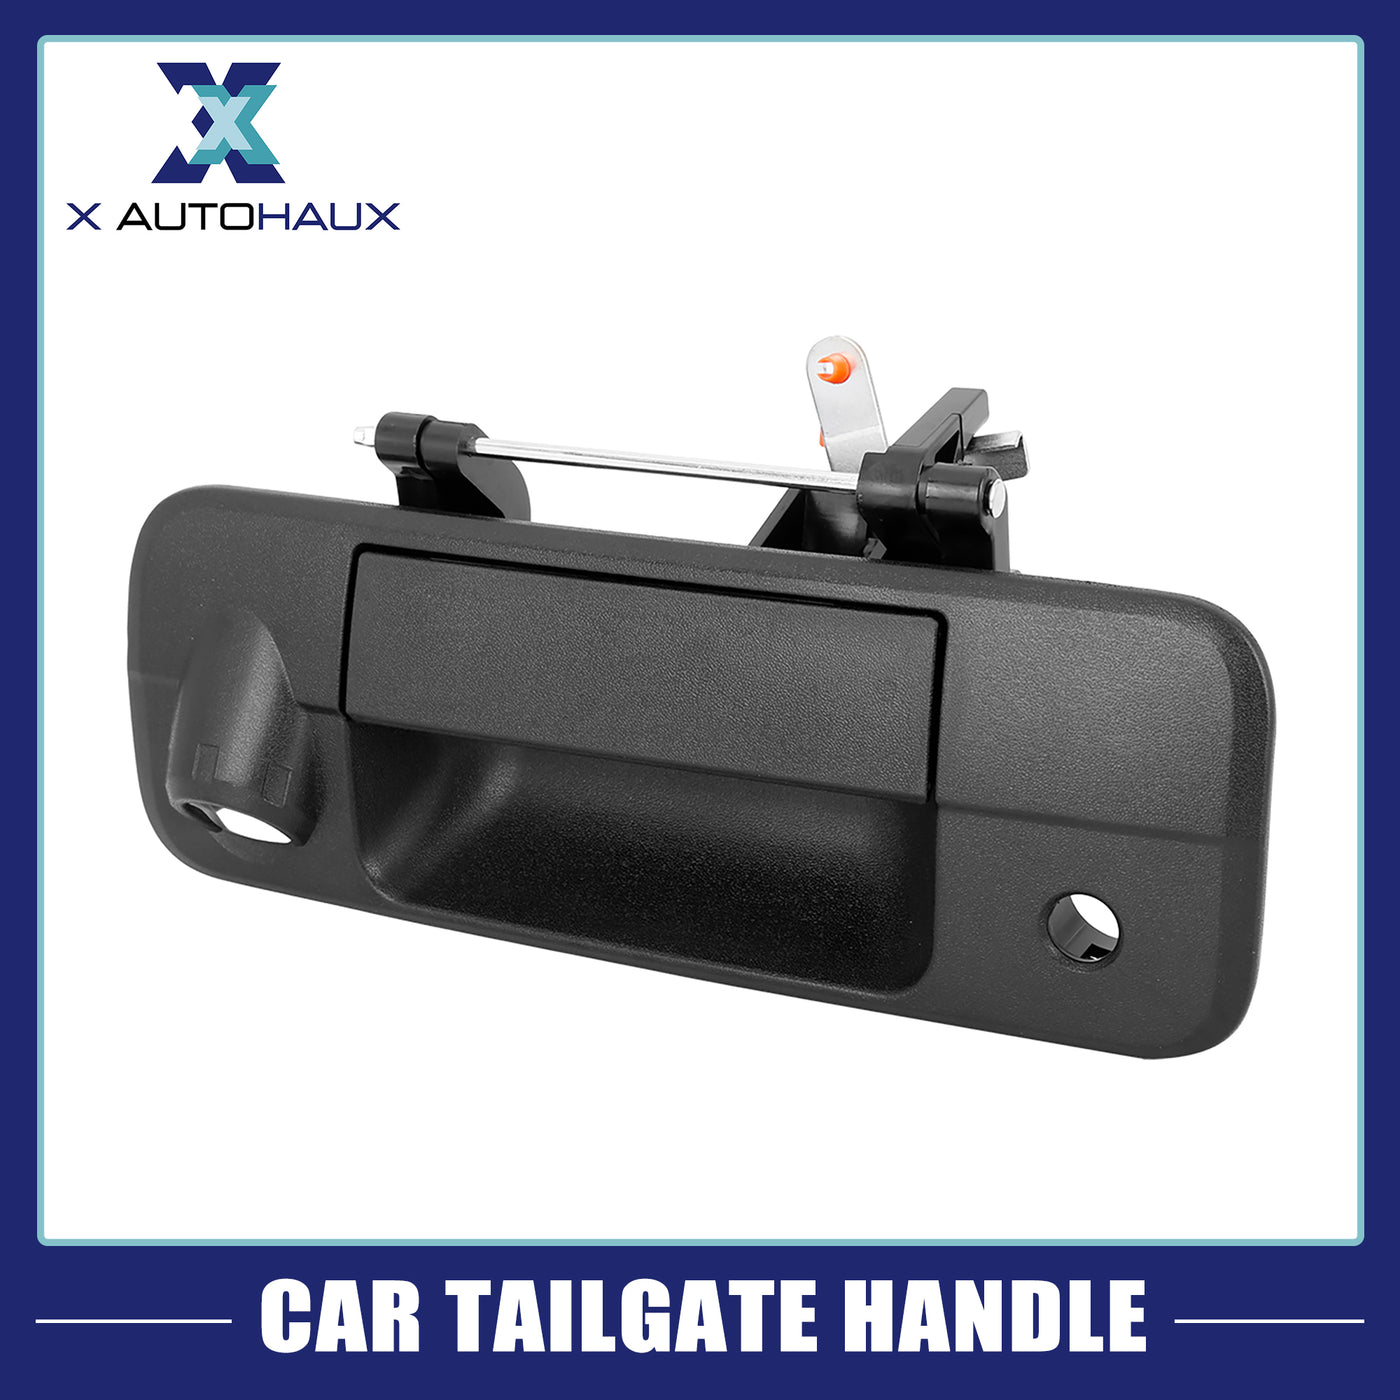 X AUTOHAUX Black Car Rear Door Liftgate Latch Tailgate Handle with Key Camera Hole Replacement for Toyota Tundra 2007-2013 690900C050 690900C051 TO191511 Tailgate Handle Liftgate Latch Handle